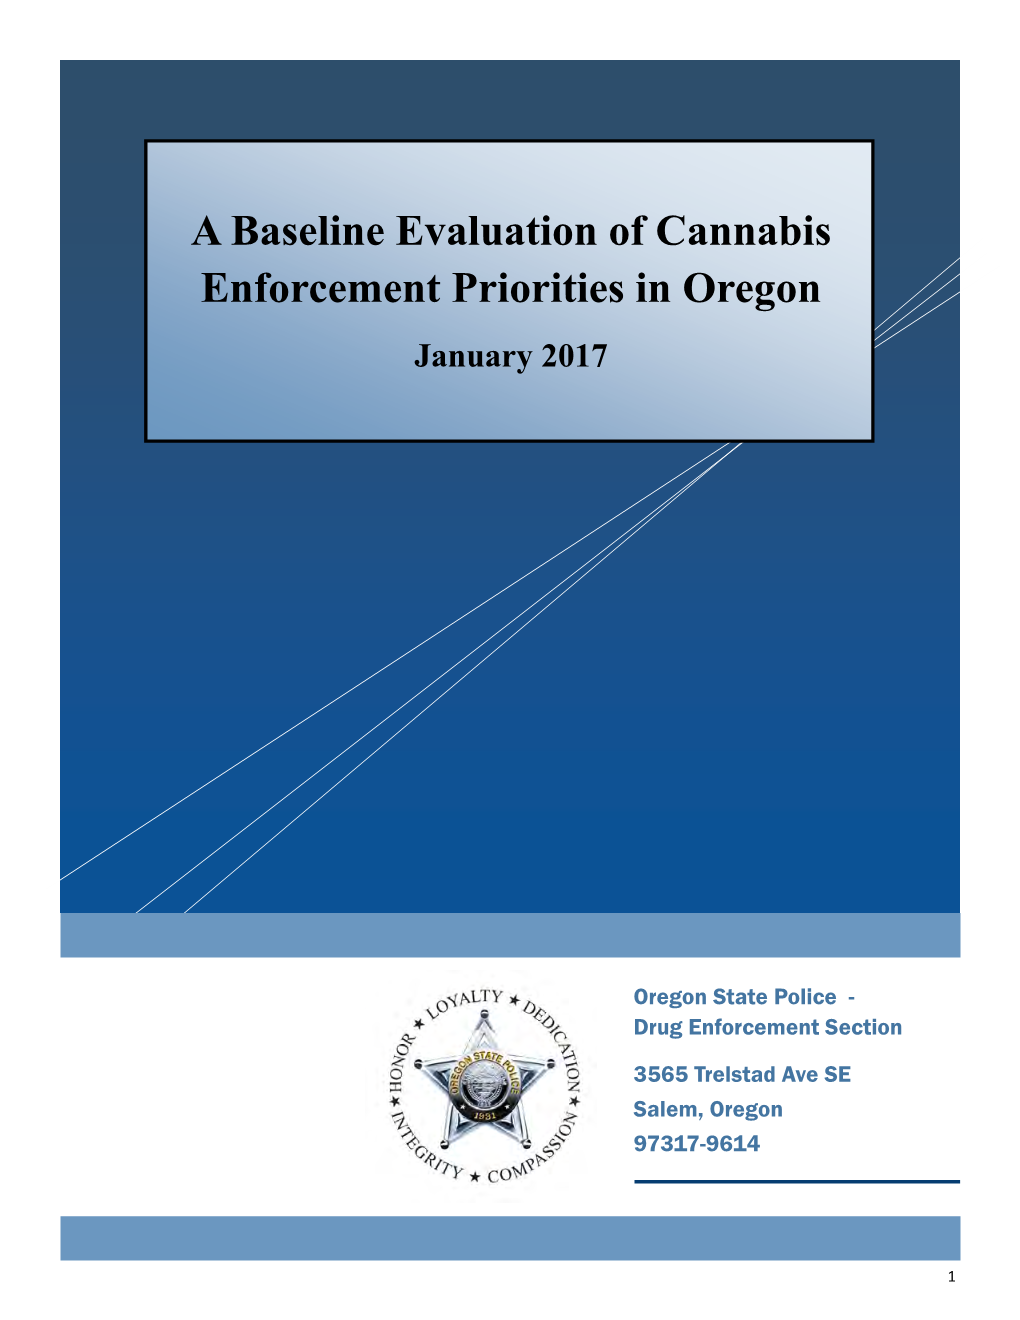 A Baseline Evaluation of Cannabis Enforcement Priorities in Oregon January 2017